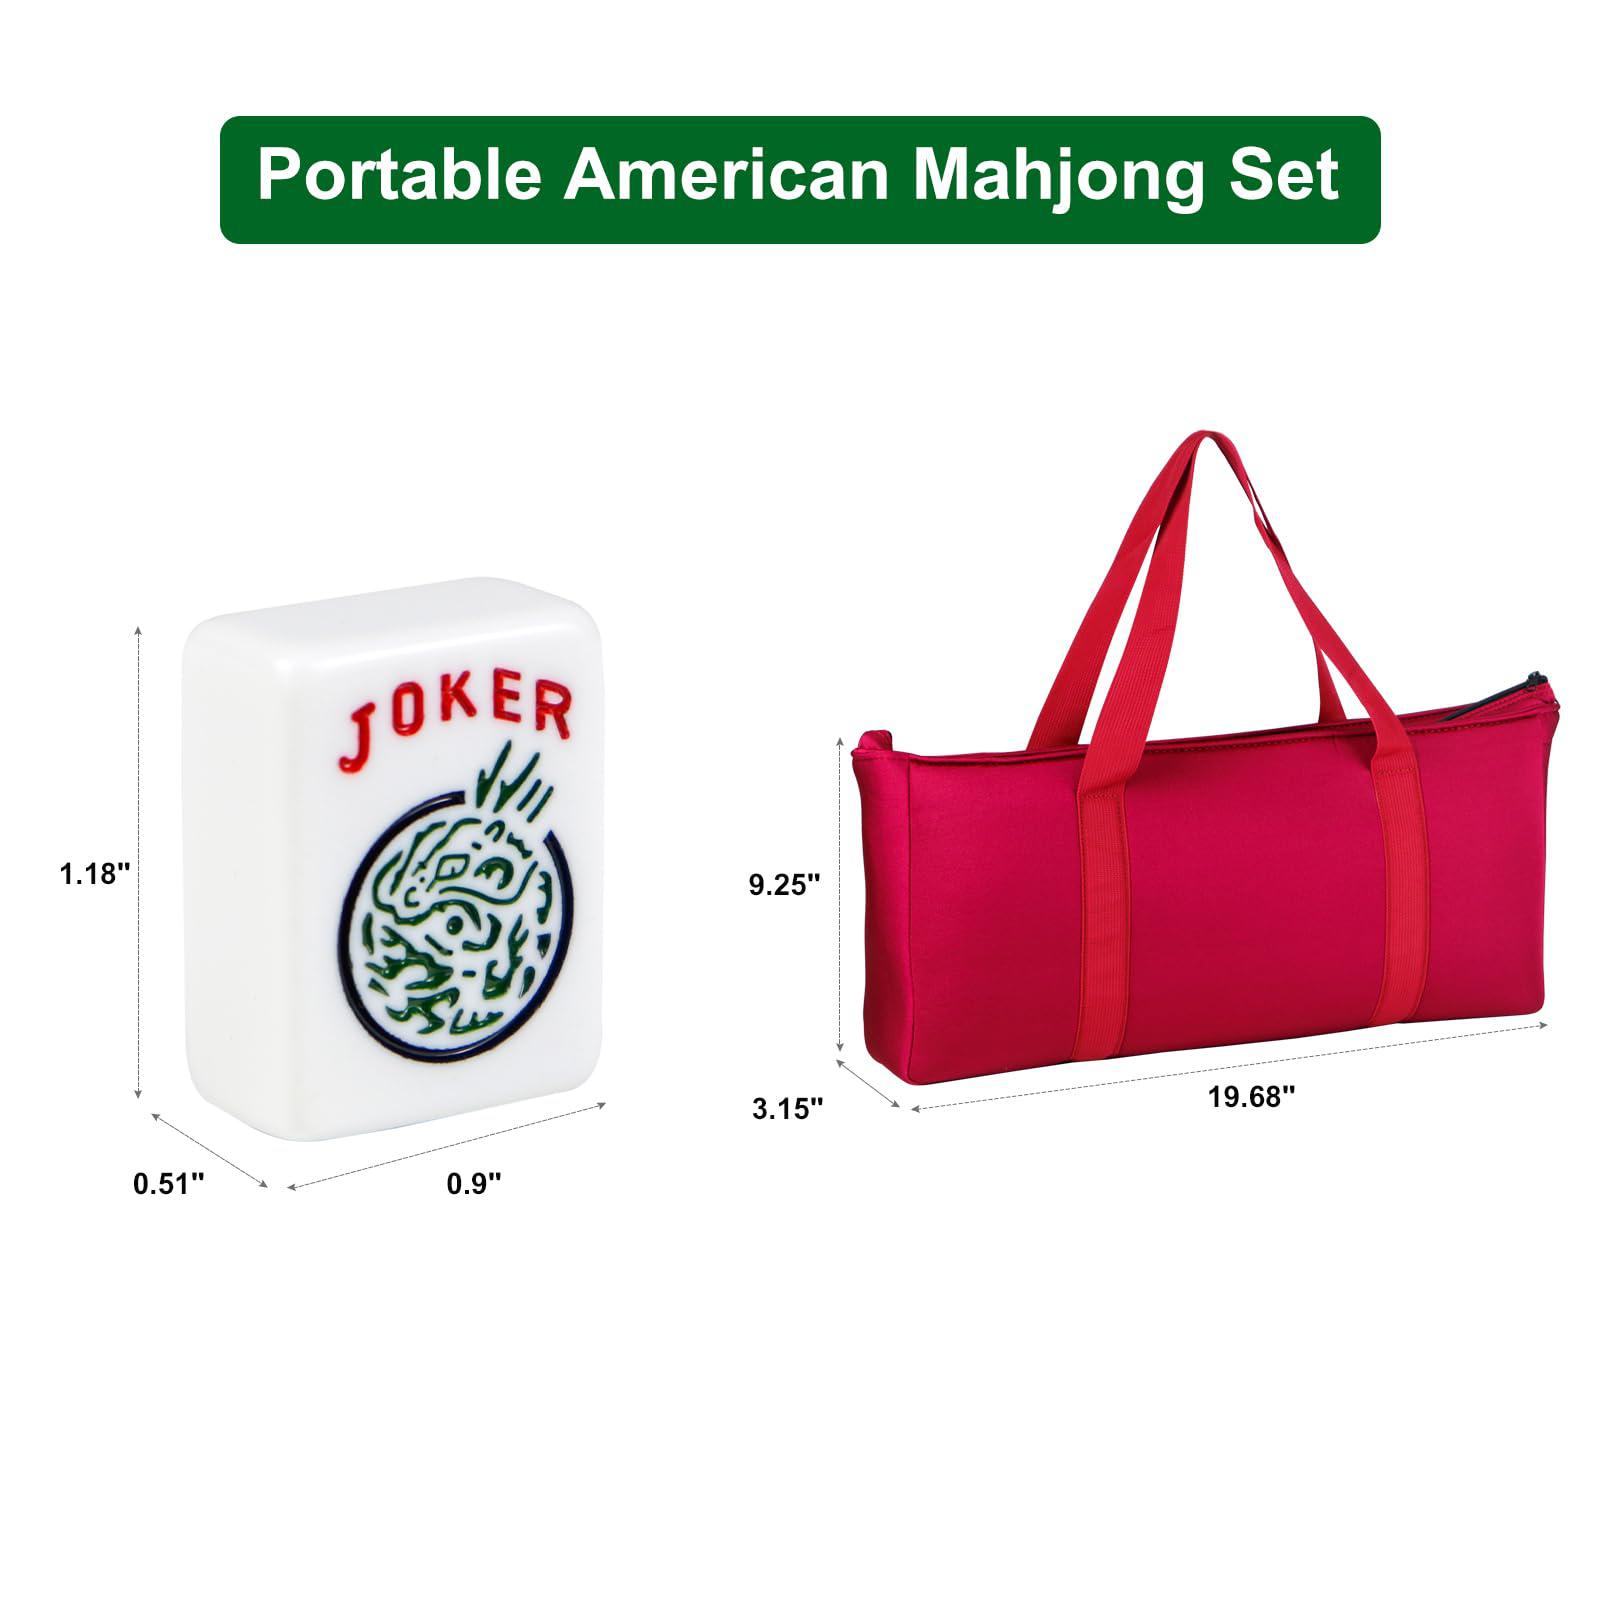 sacpero american mahjong game set 166 mahjong tiles set 4 all-in-one rack/pushers,100 chips,1 wind indicator with carrying ba